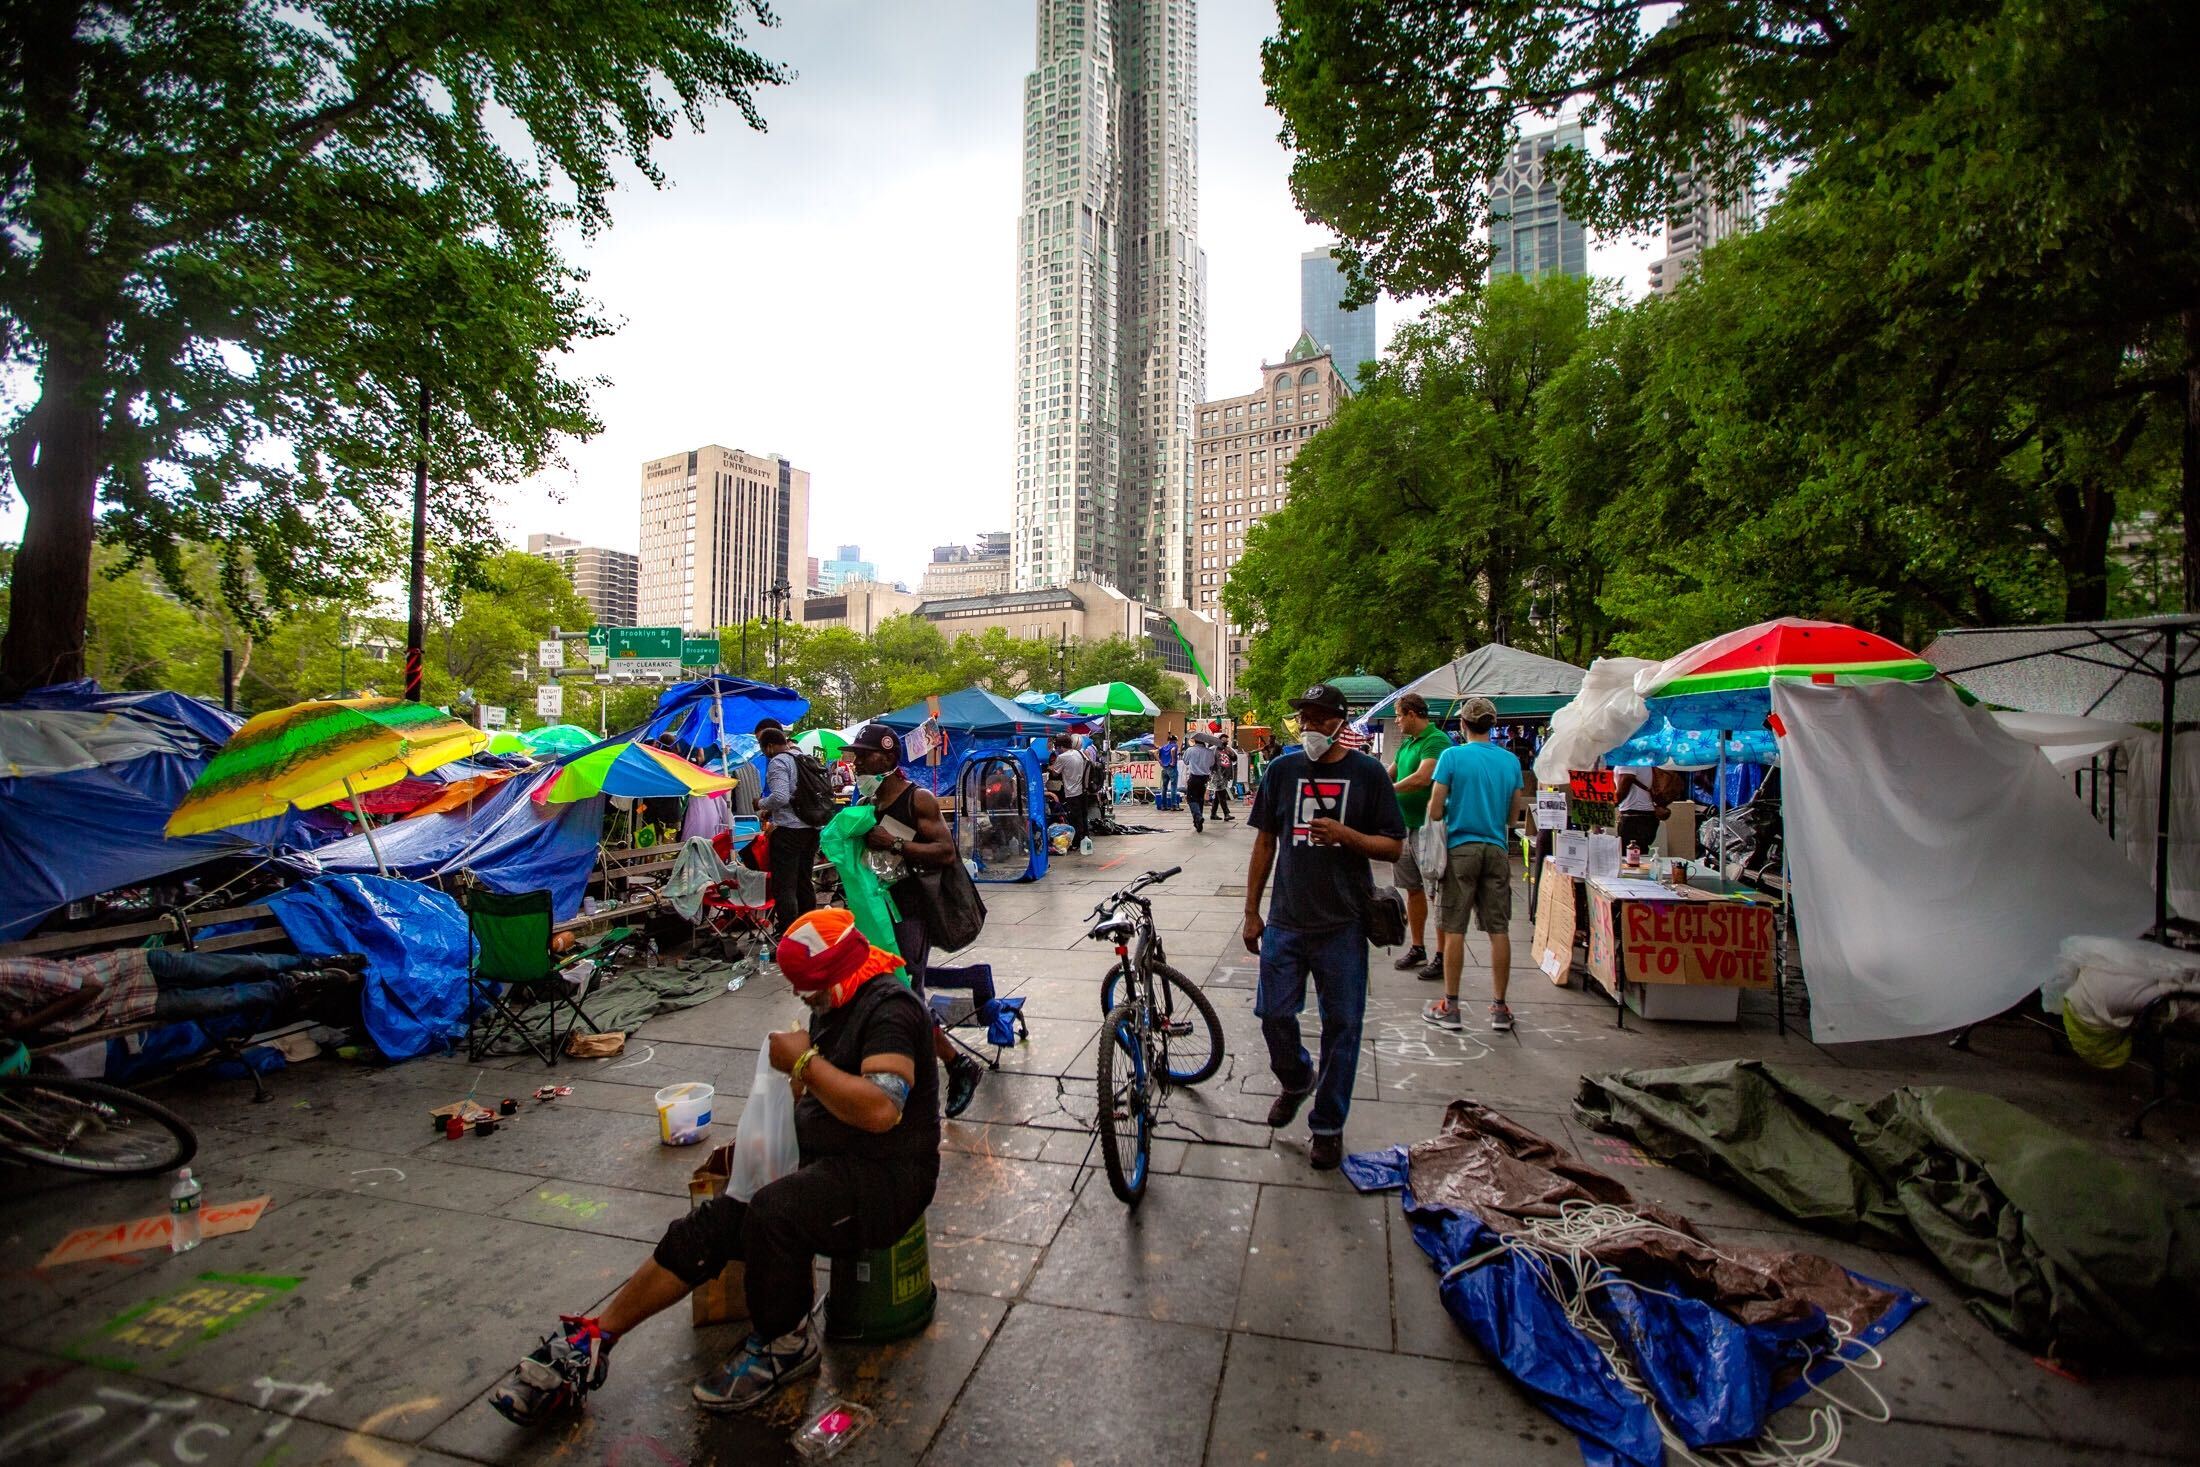 Tents and protesters at Occupy City Hall, with City Hall in the background